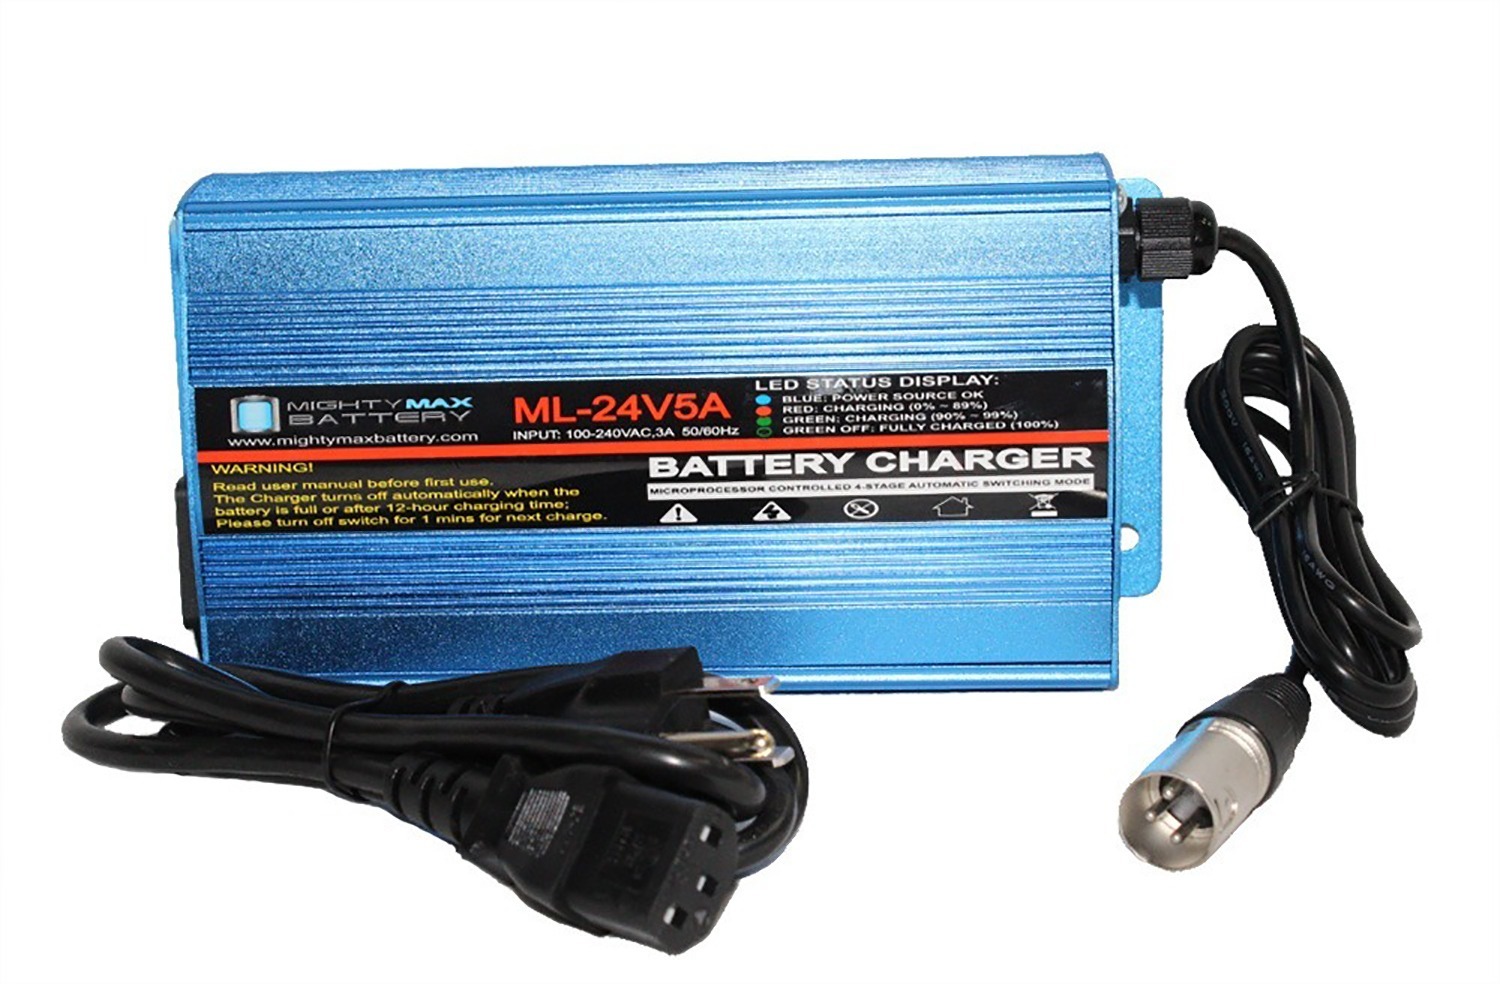 Ml 24v5a Charger Mighty Max Battery